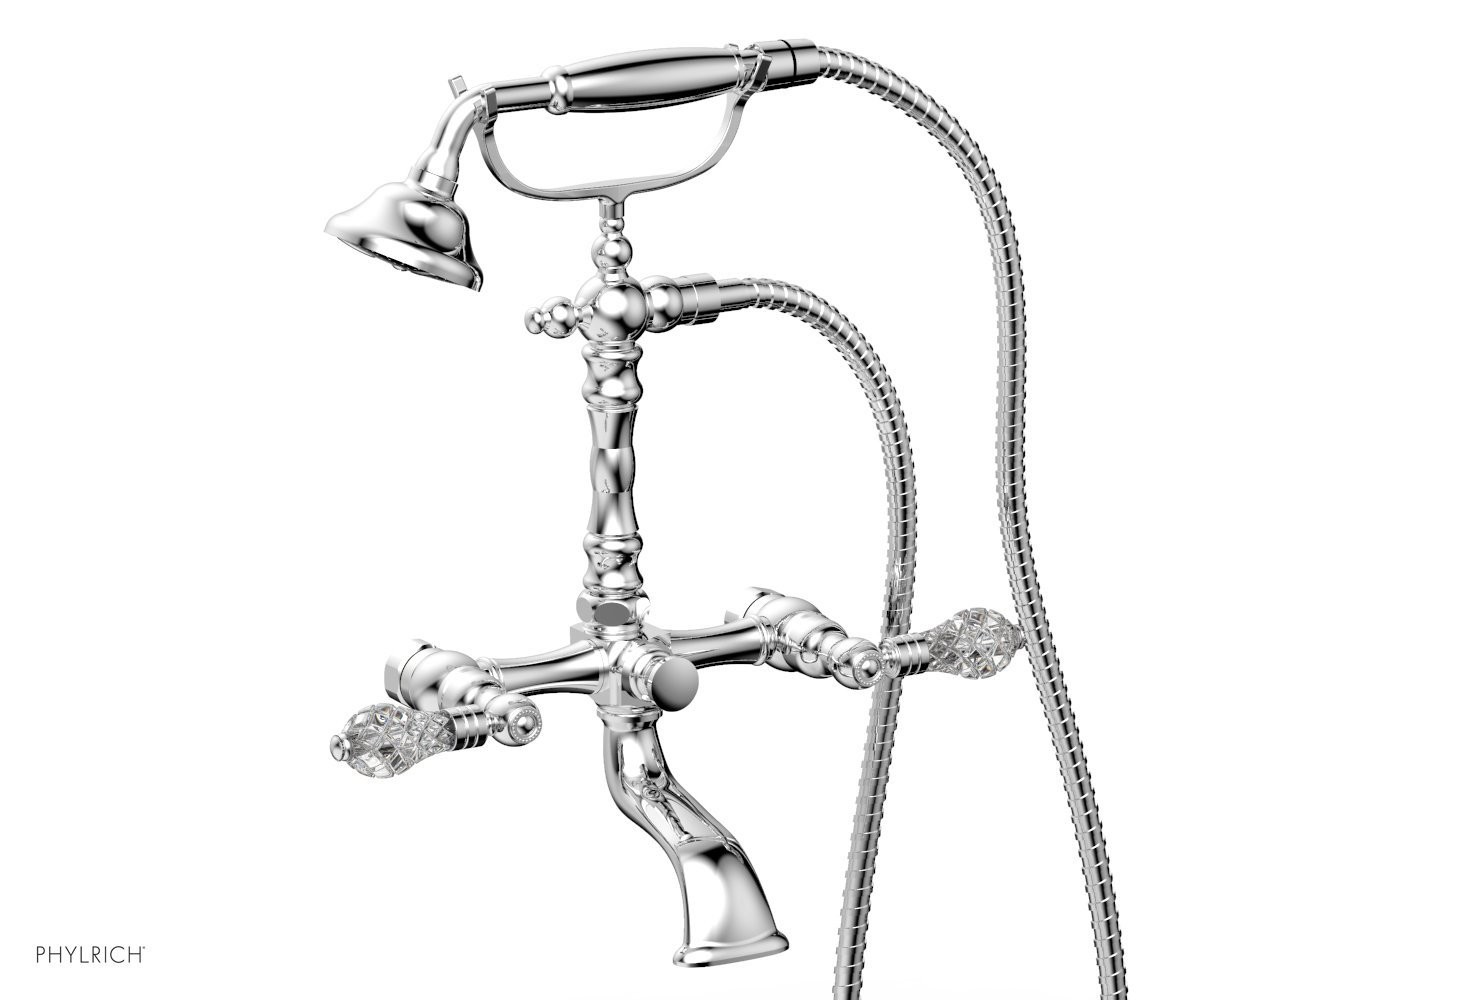 PHYLRICH K2393-16/026 CUT CRYSTAL TWO HOLES WALL MOUNT EXPOSED TUB FILLER WITH HAND SHOWER AND LEVER HANDLE